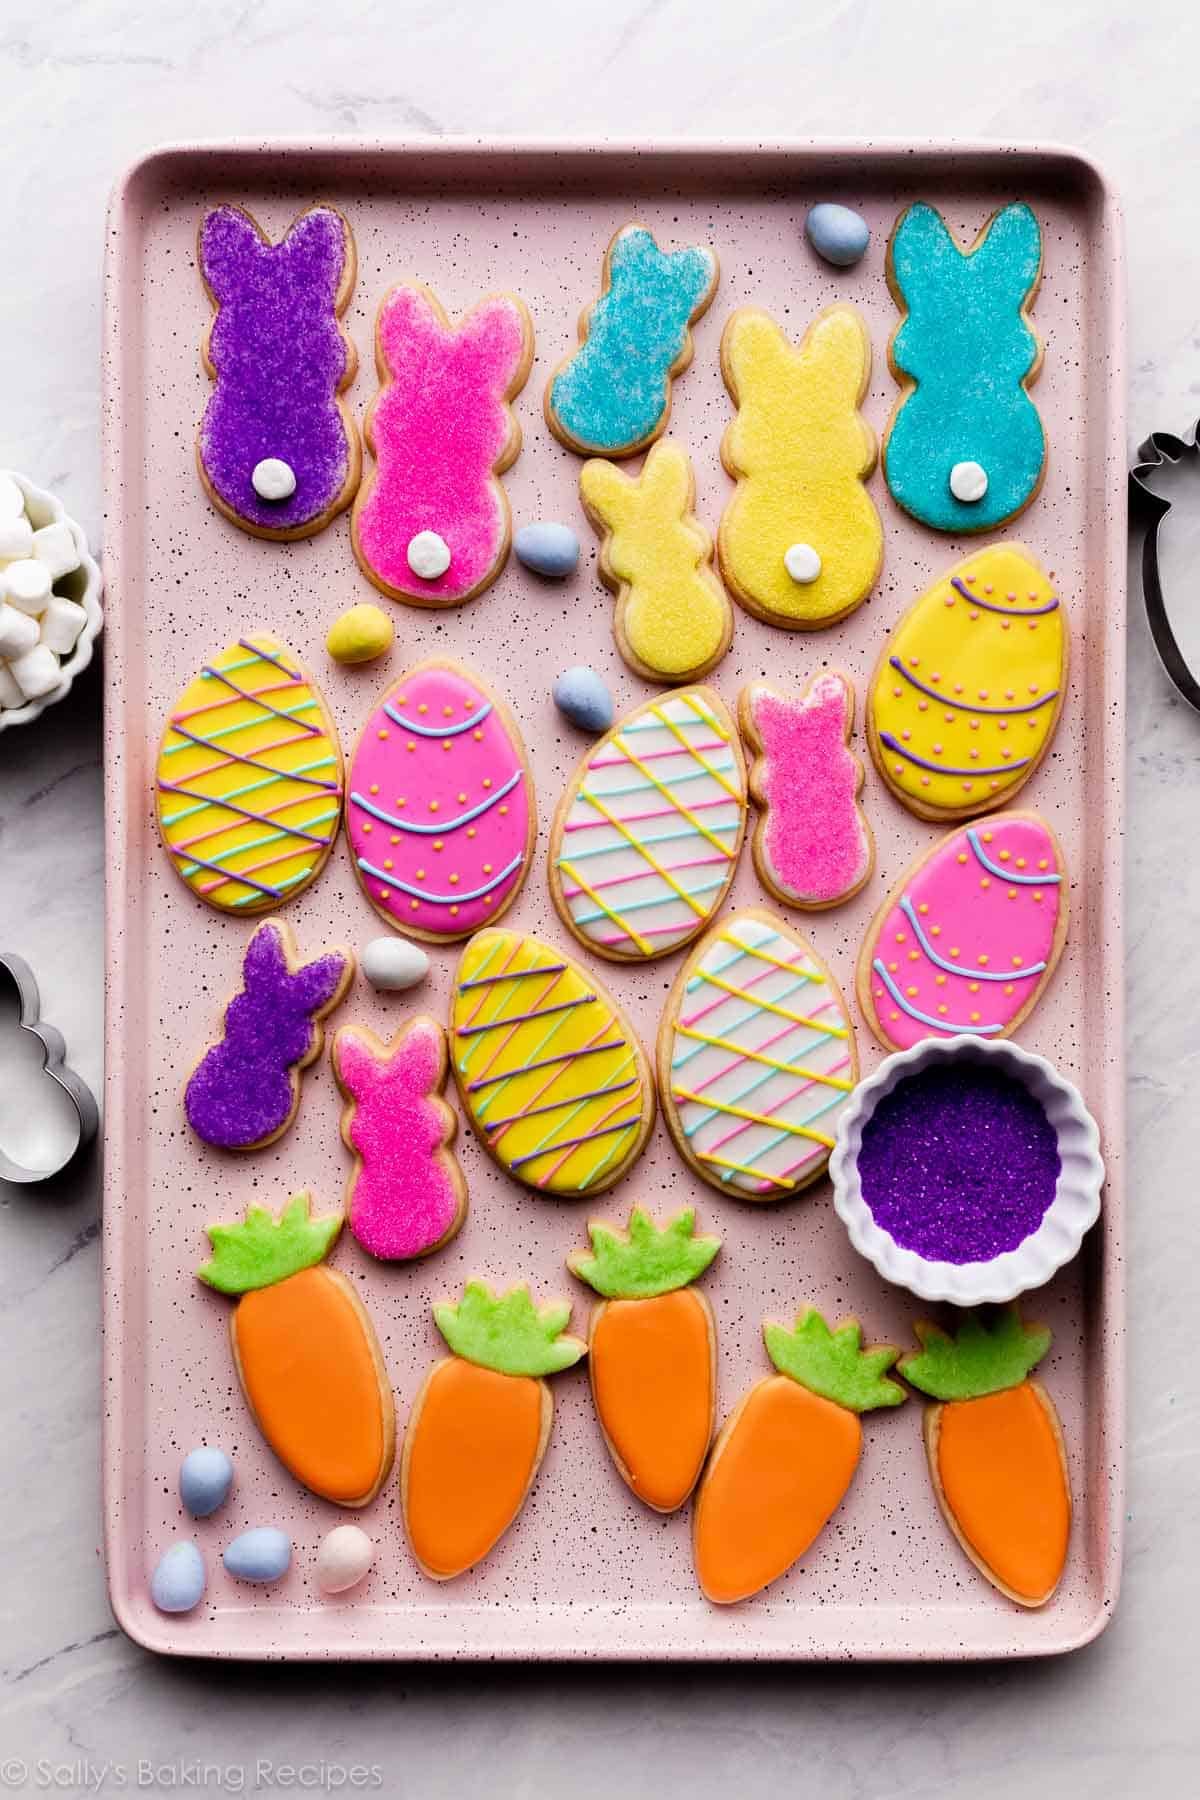 decorated Easter cookies on pink baking sheet including bunnies with marshmallow tails, Easter eggs, and carrots with orange and green icing.